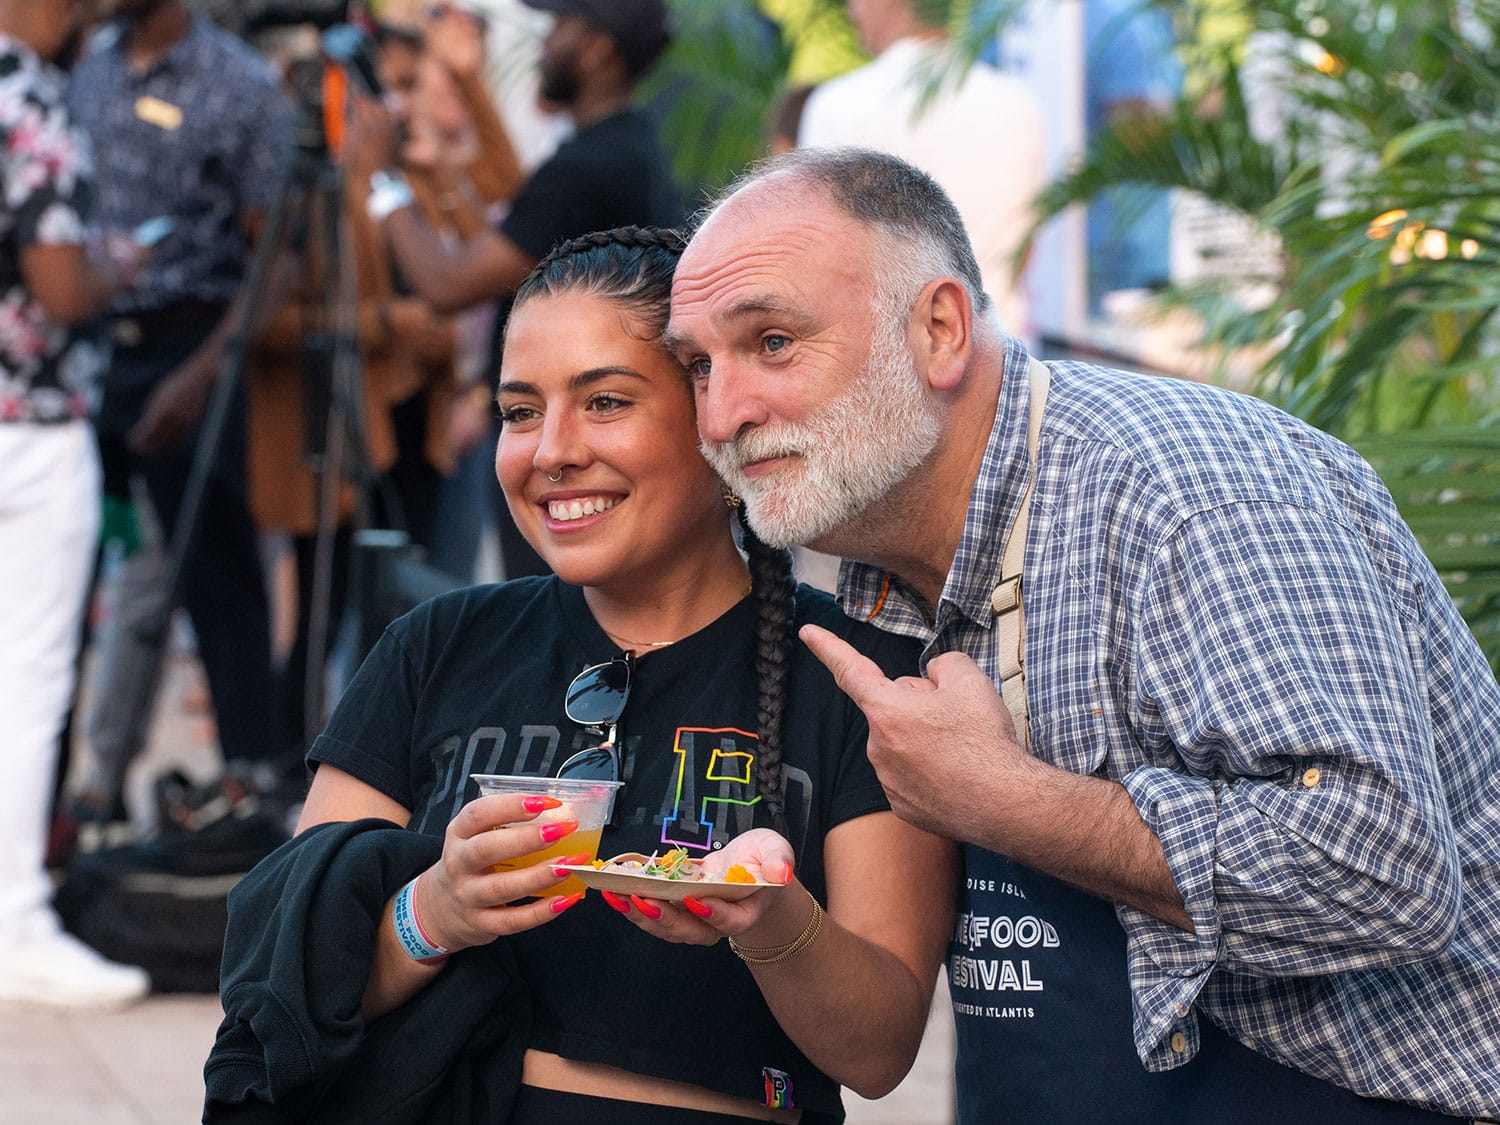 Chef and humanitarian José Andrés poses for a photograph with a guest at the Nassau Paradise Island Wine and Food Festival at Atlantis Paradise Island.